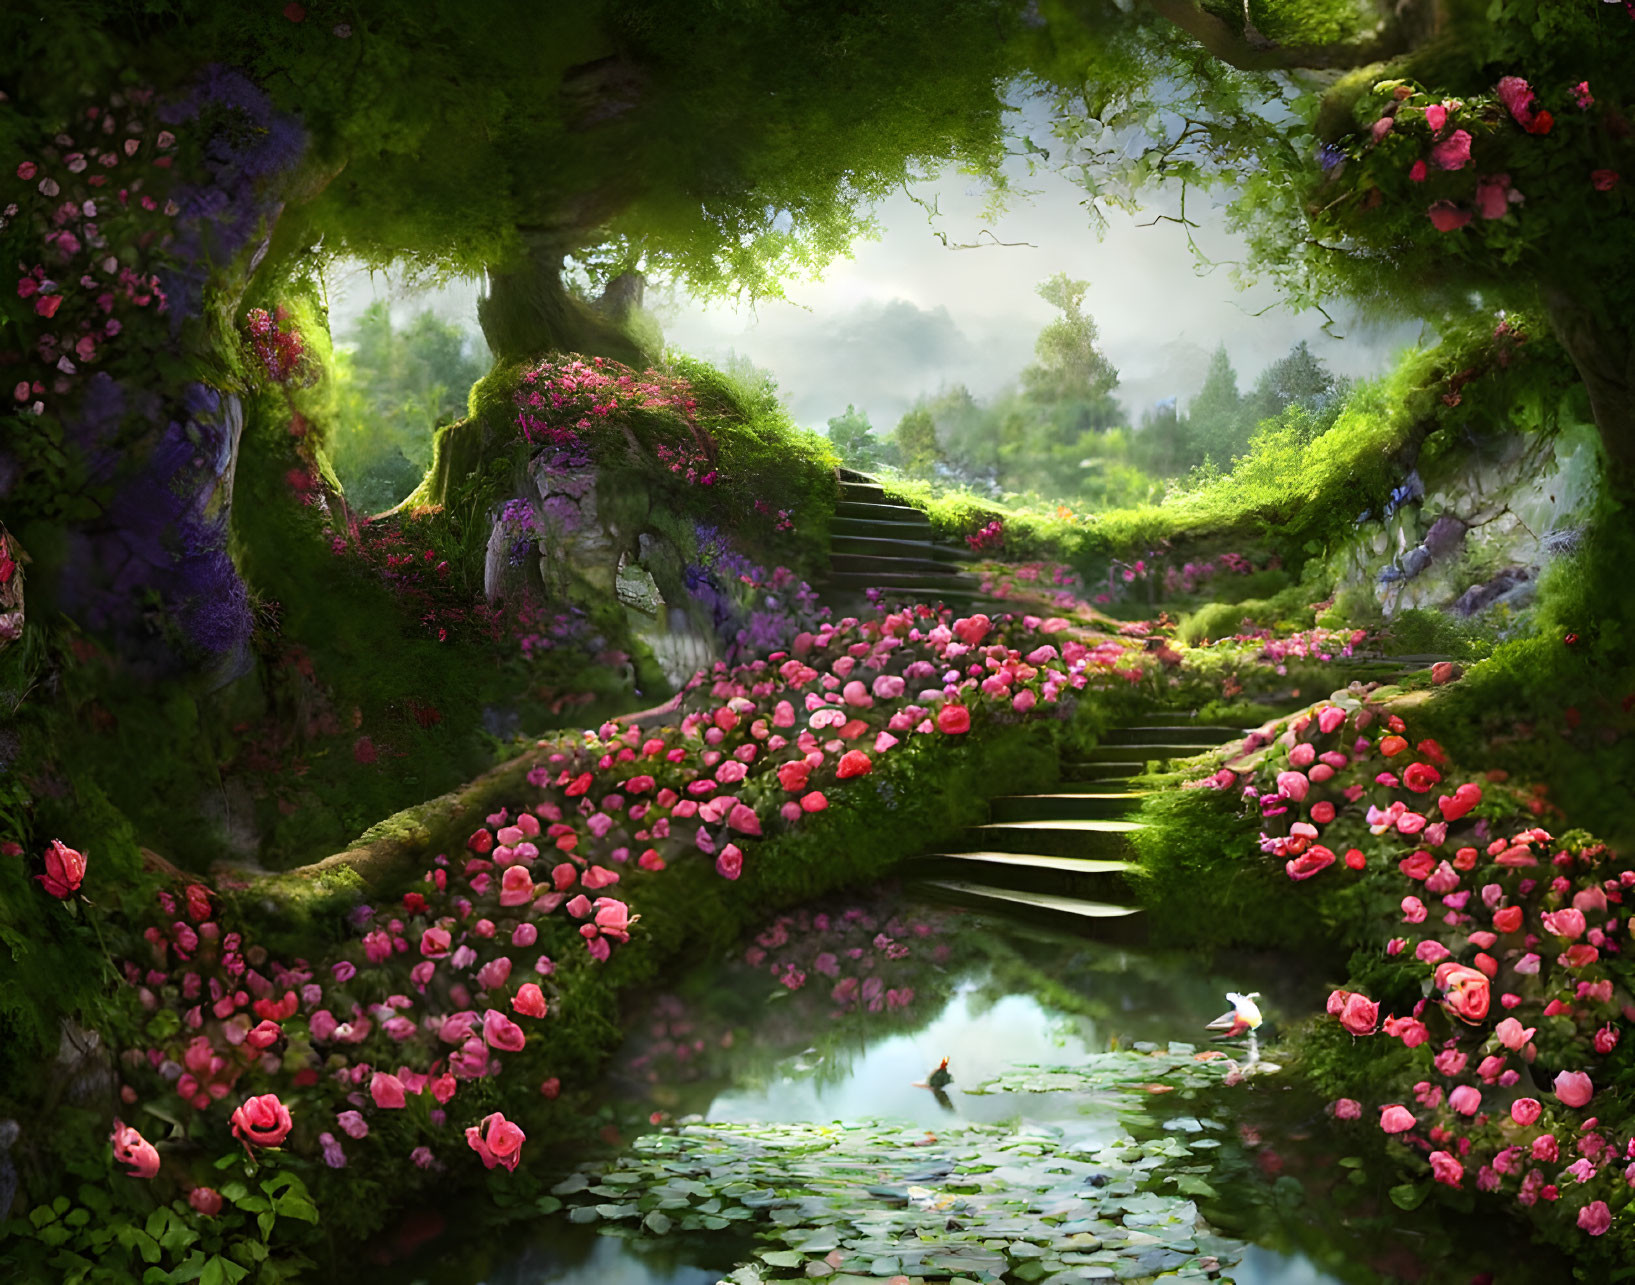 Lush Greenery, Pink Flowers, Pond, Stone Stairway in Mystical Forest